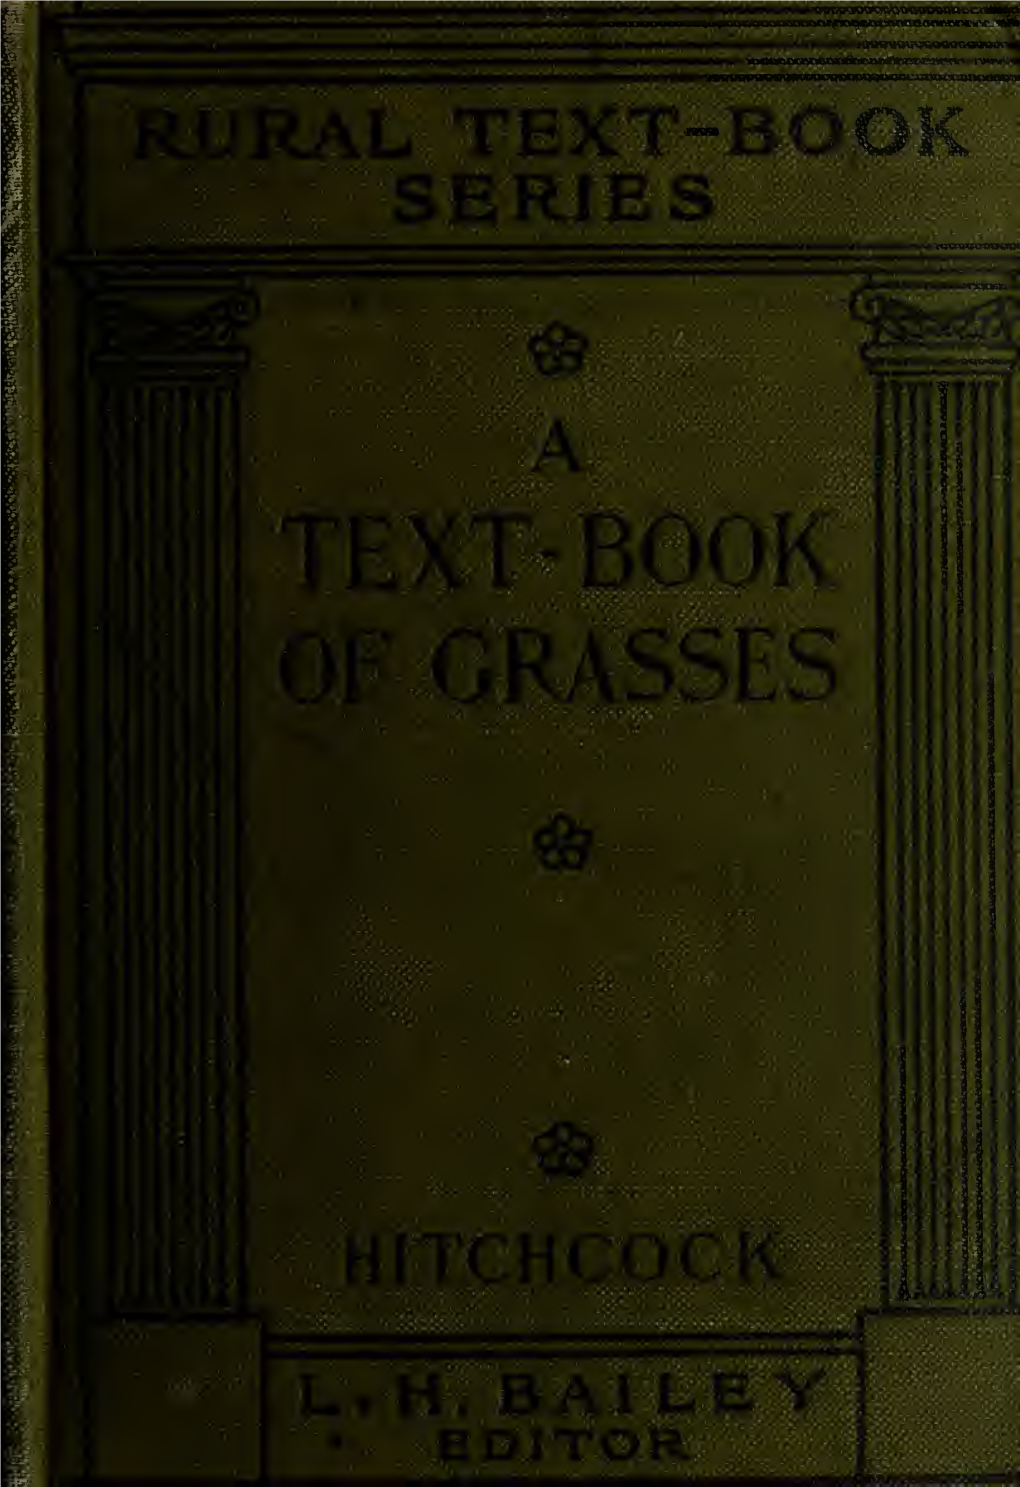 A Text-Book of Grasses with Especial Reference to the Economic Species